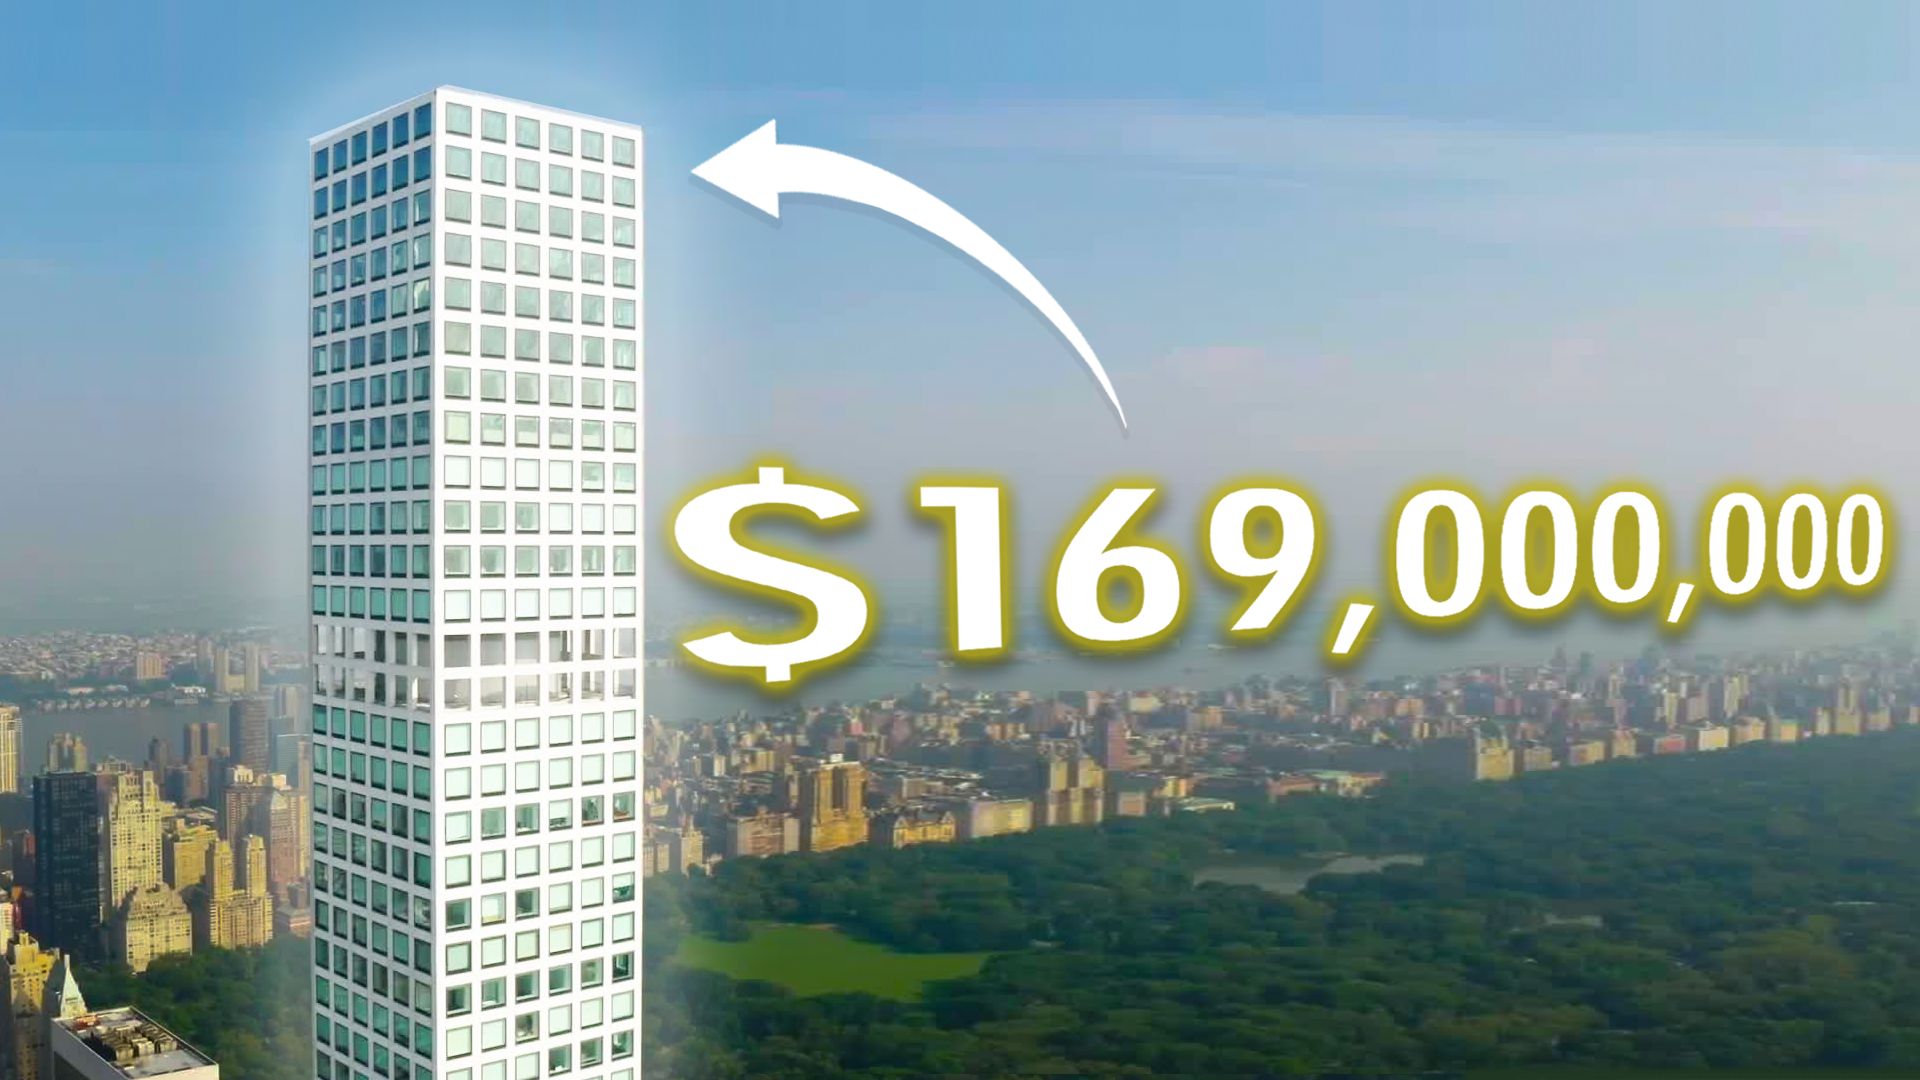 Watch Inside The Most Expensive Penthouse In America ($169M) | On the ...